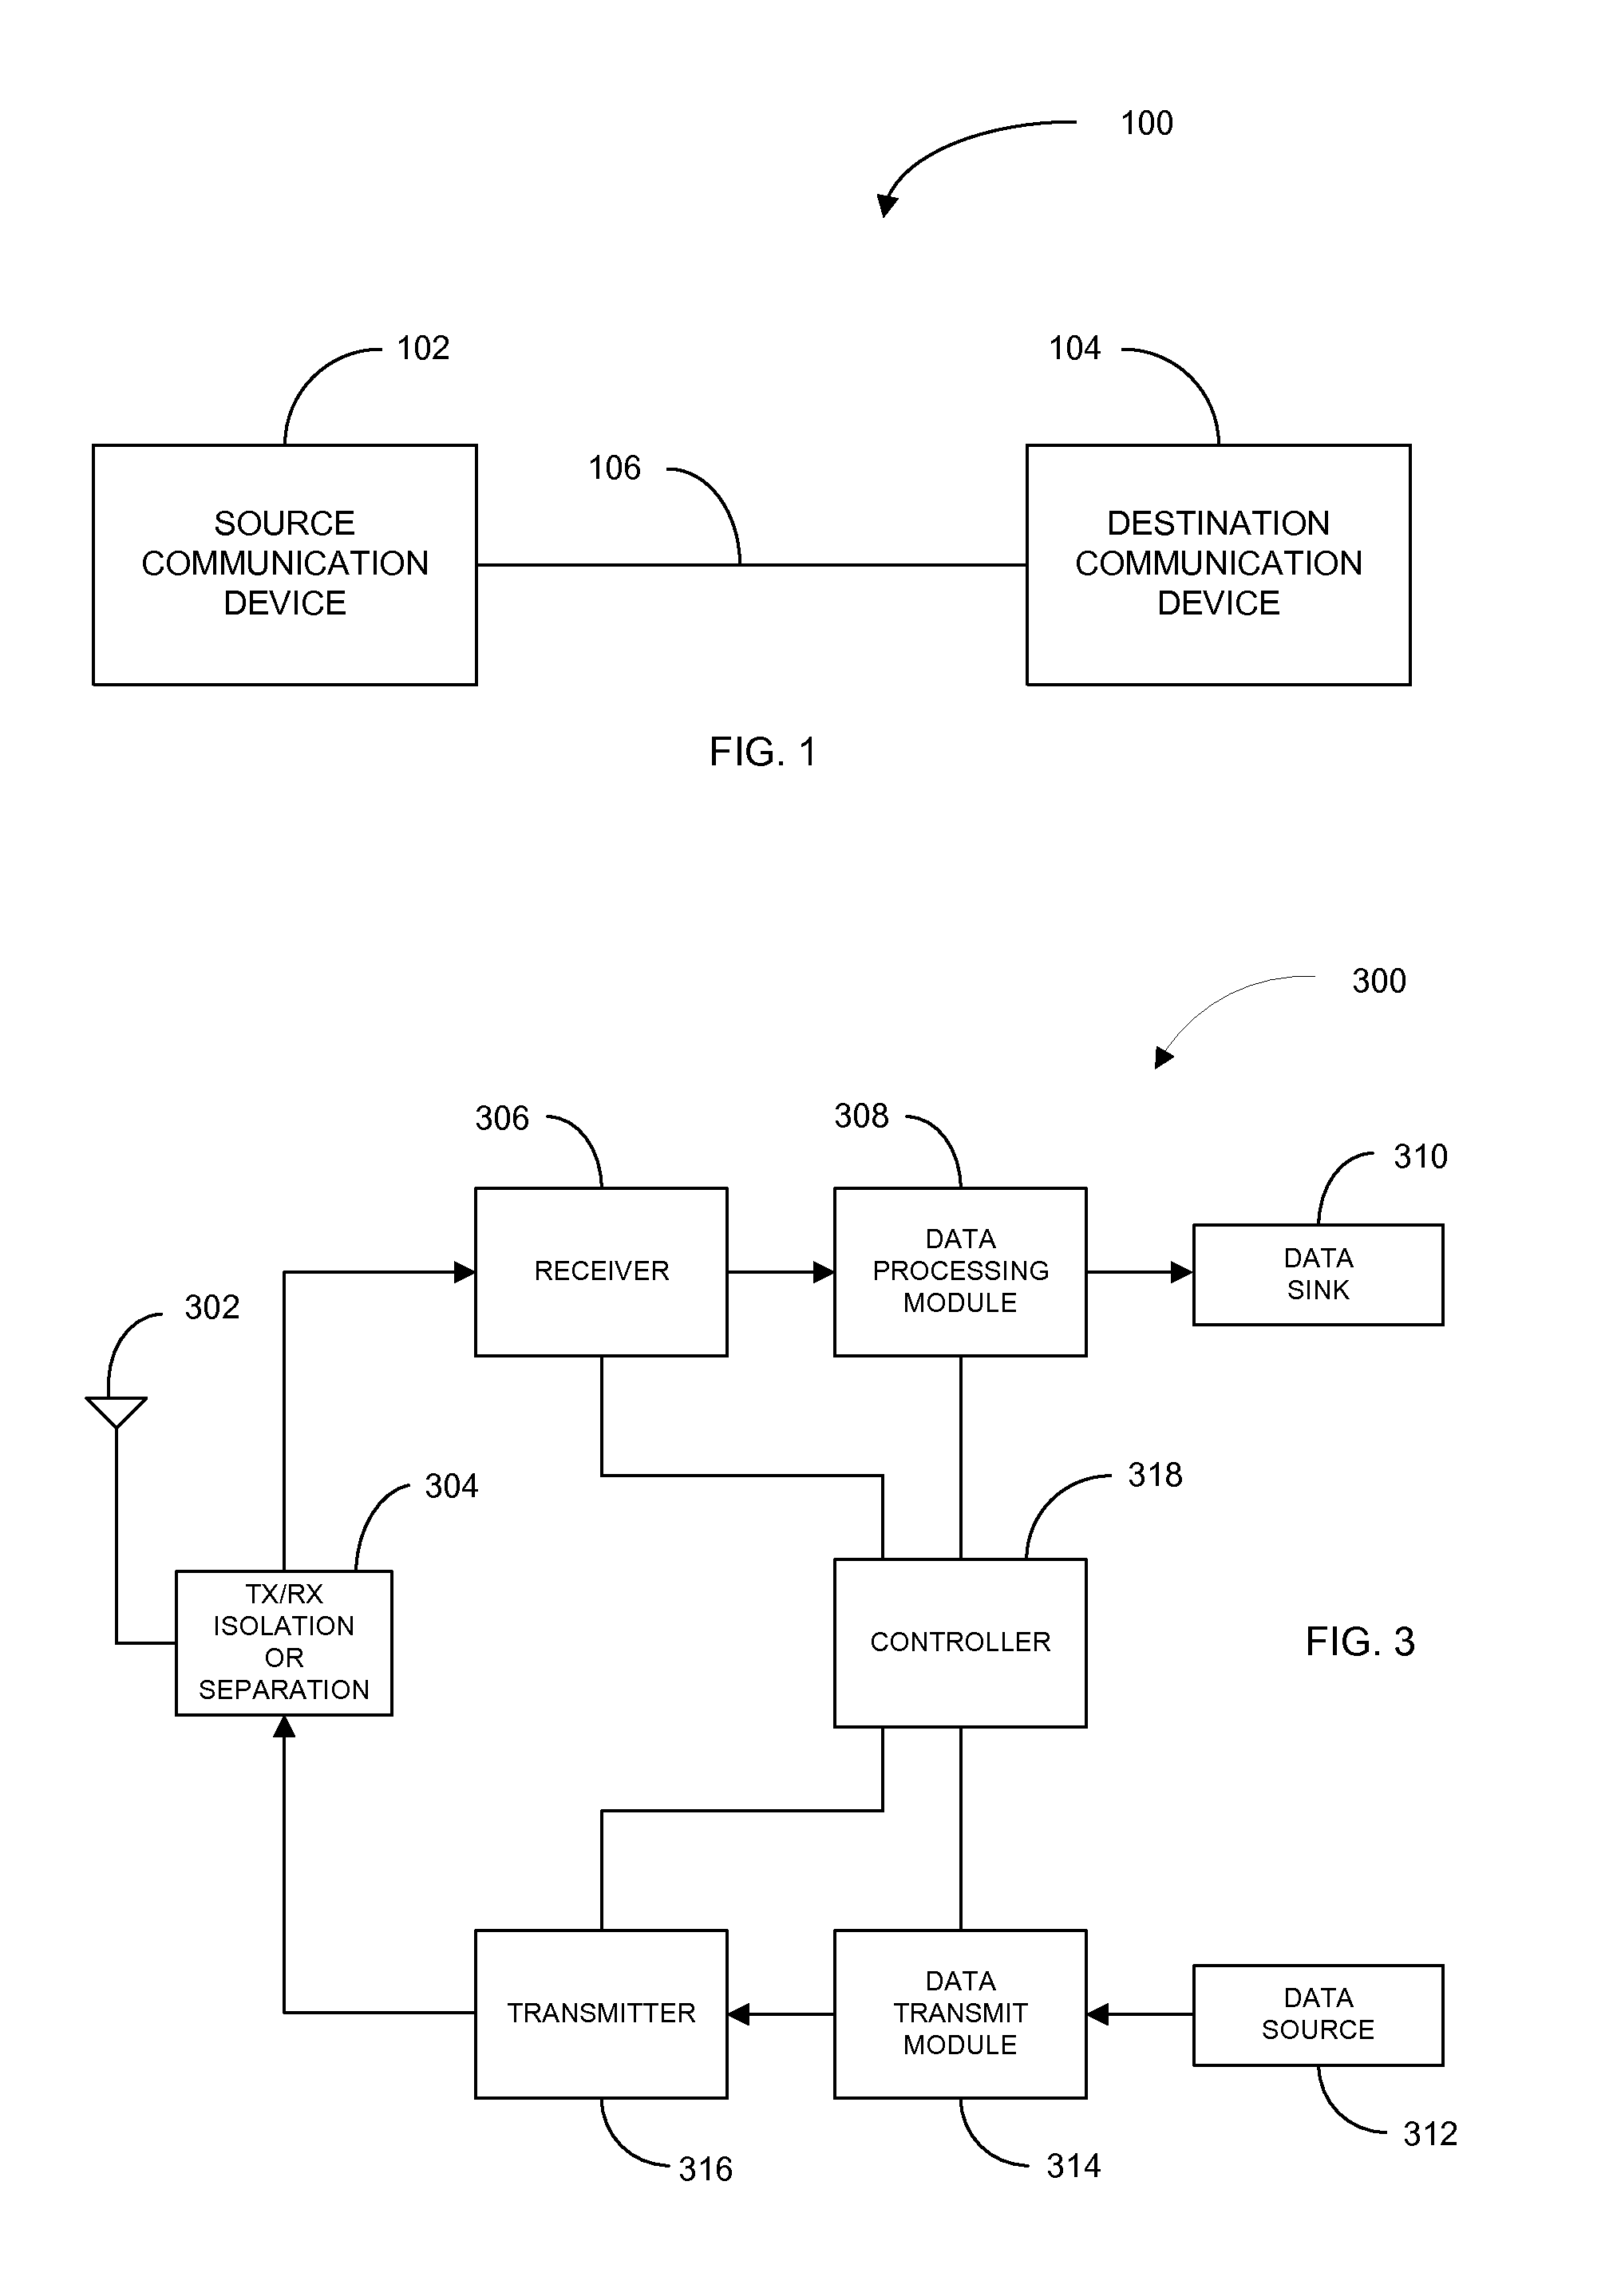 System and method for adapting transmit data block size and rate based on quality of communication link